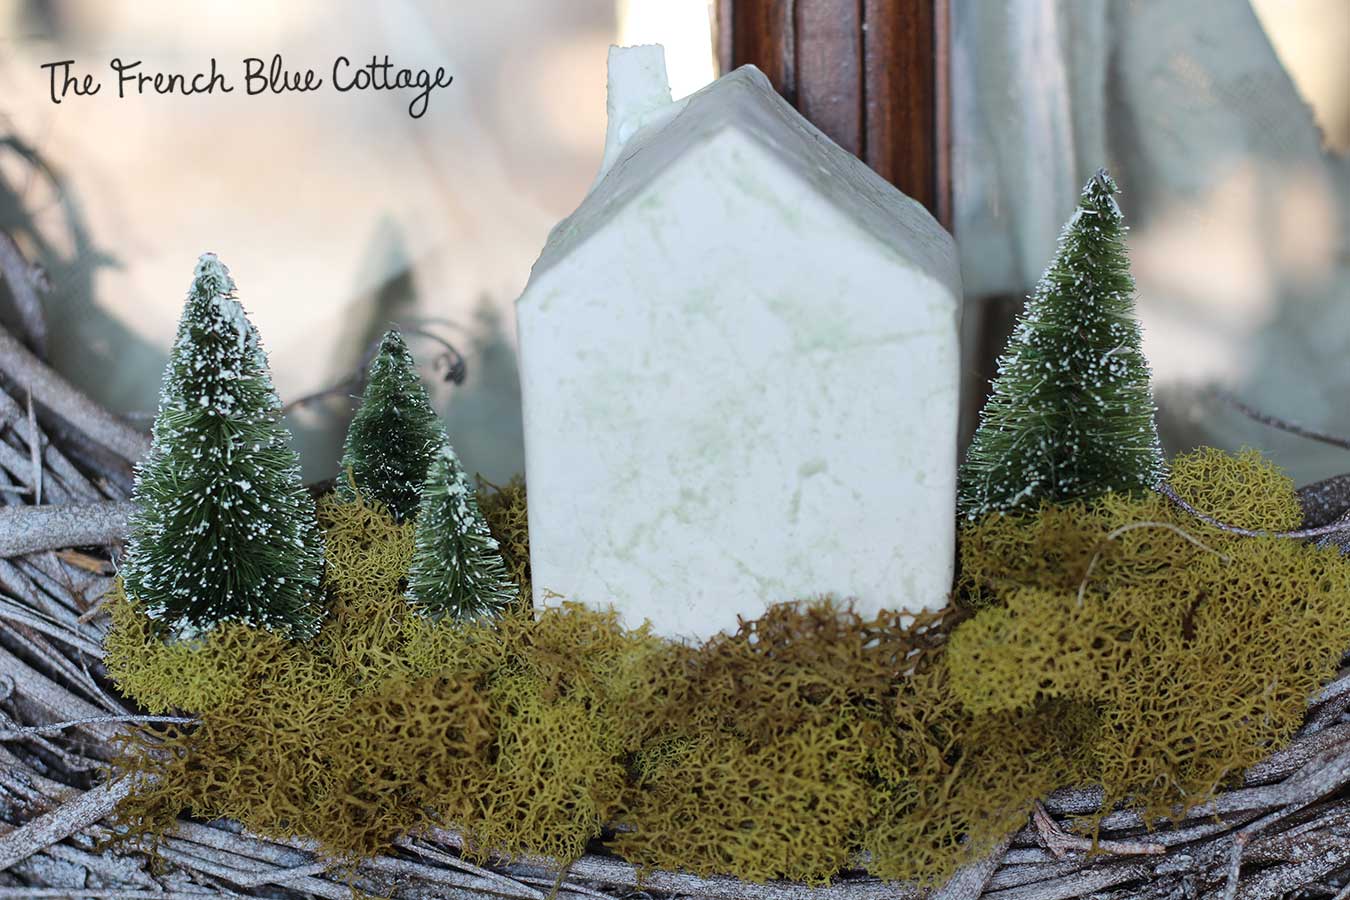 Tiny paper mâché house and bottle brush trees in a wreath.